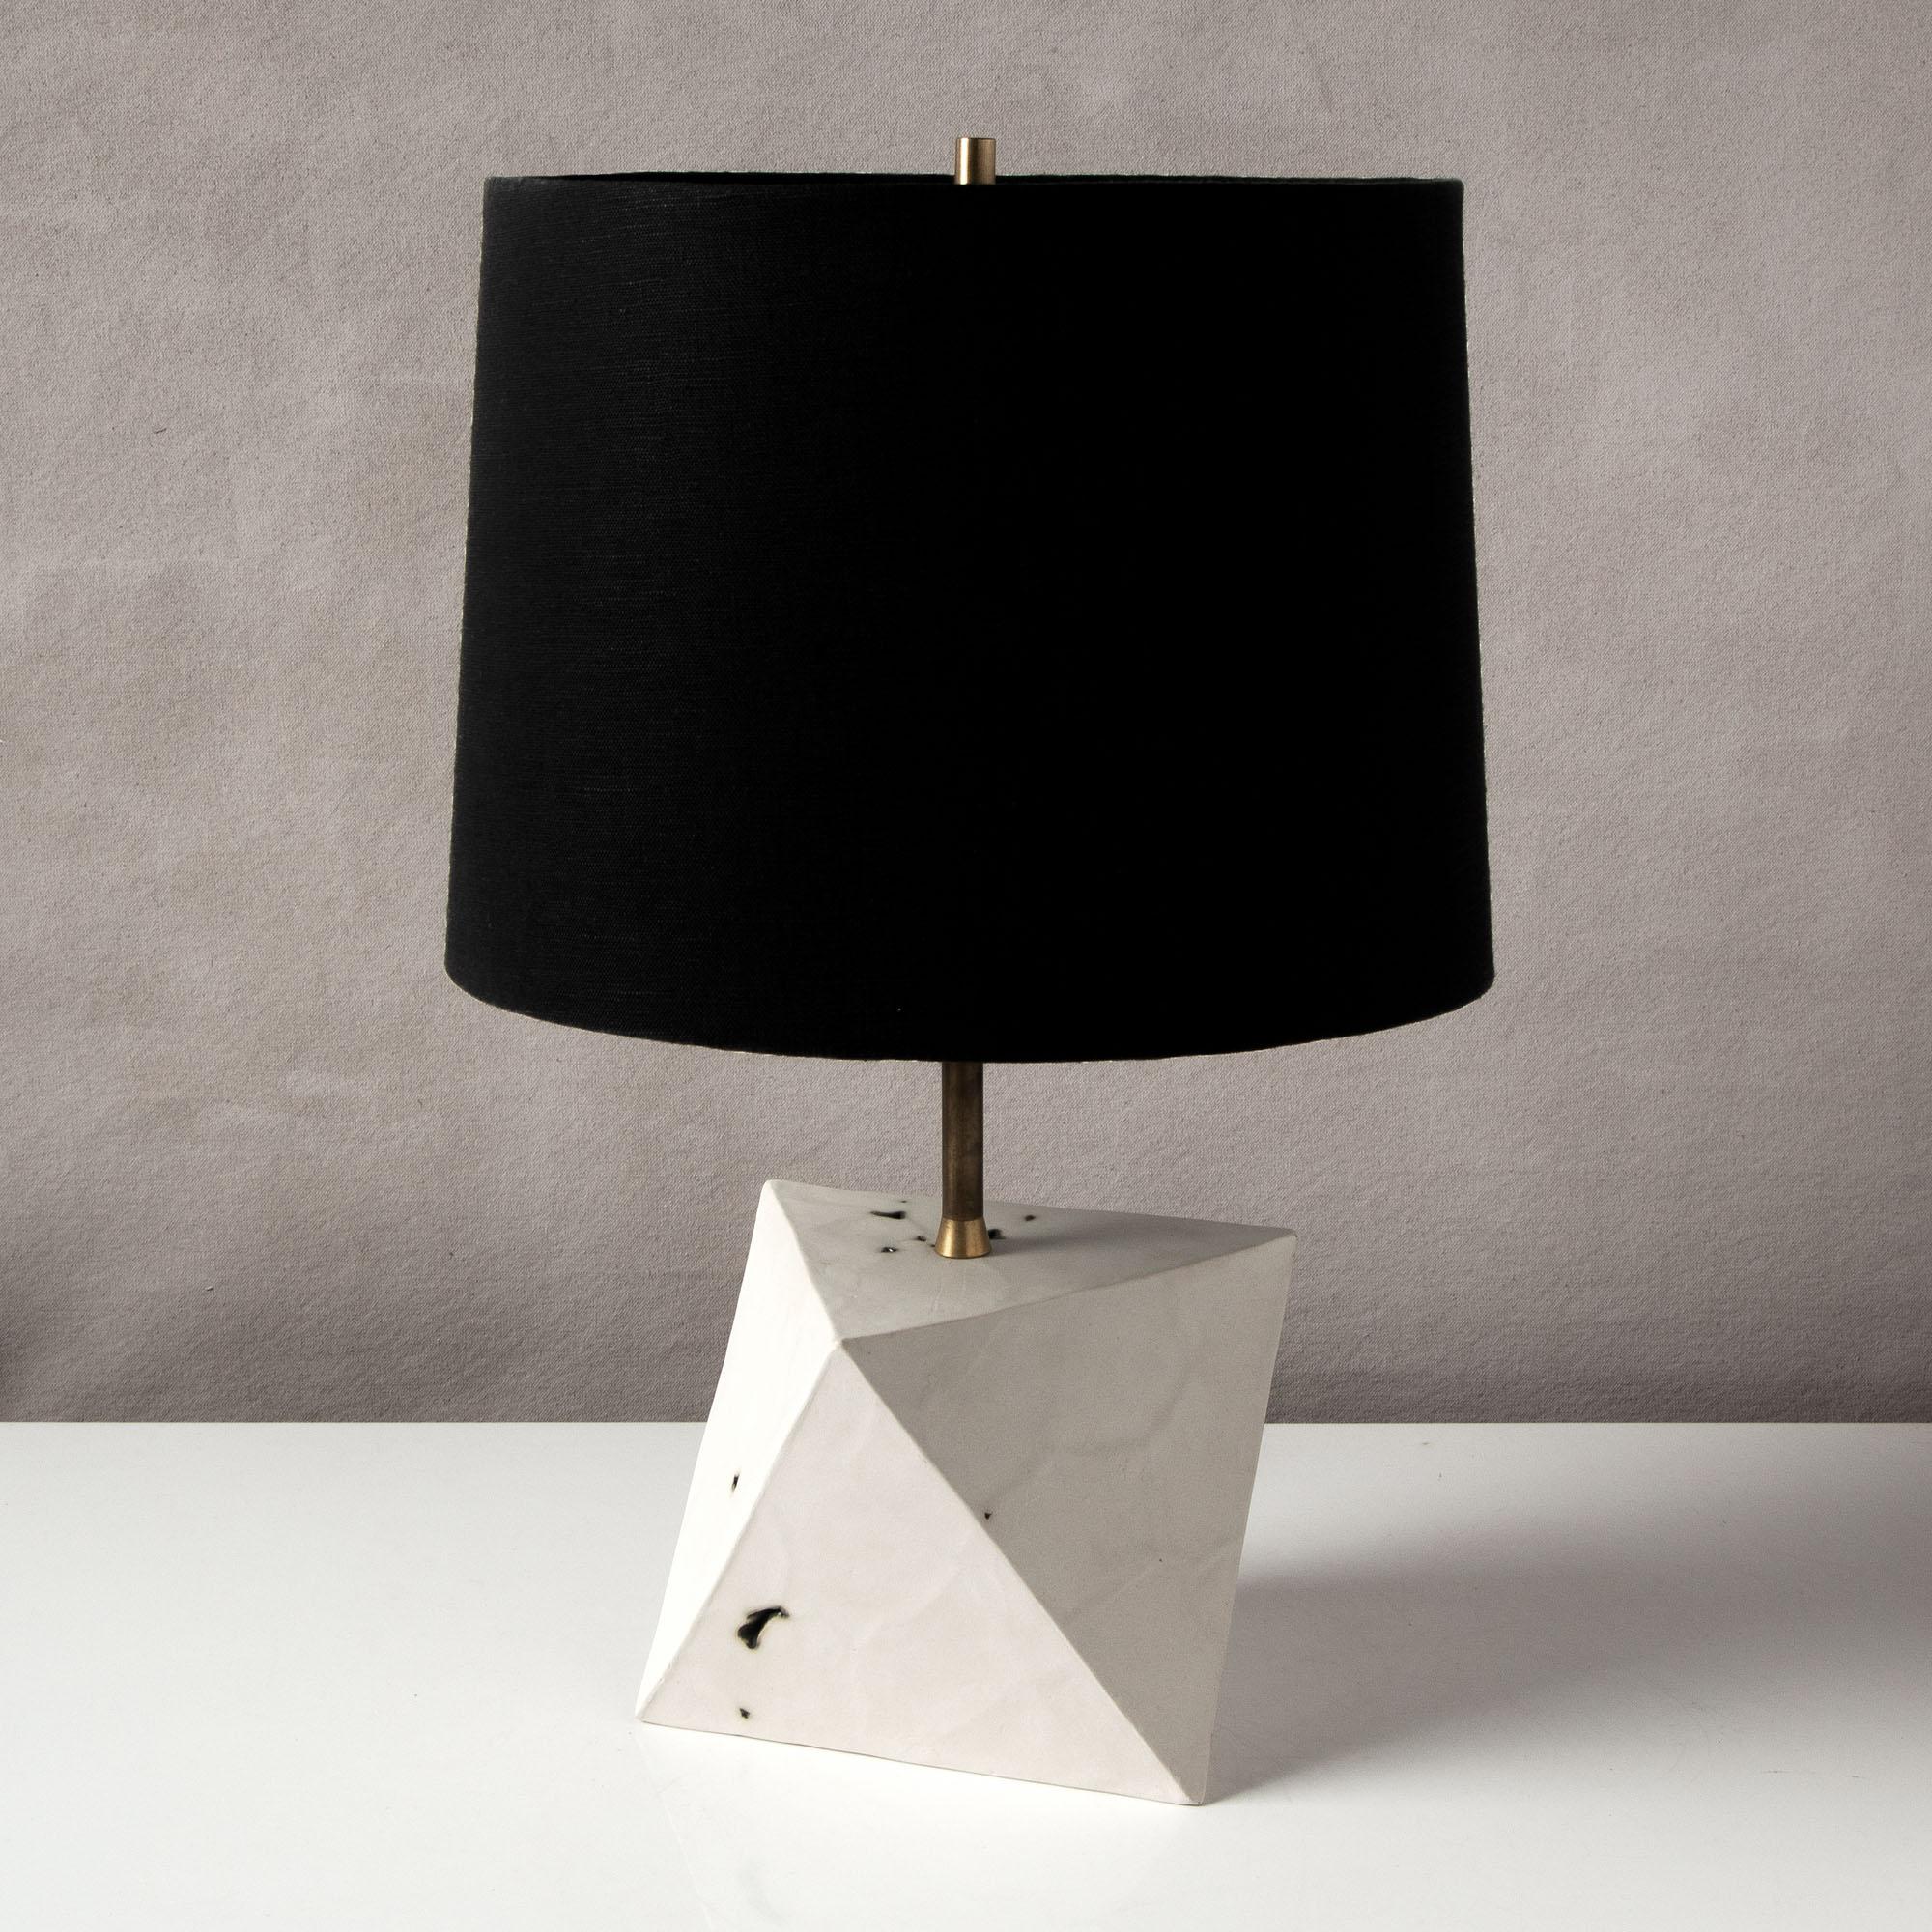 This sculptural geometric lamp is and crafted from slabs of unglazed white porcelain with highly individual black oxide burnout detailing, giving each of their facets a unique textural matte finish. The organic texture contrasts with the clean